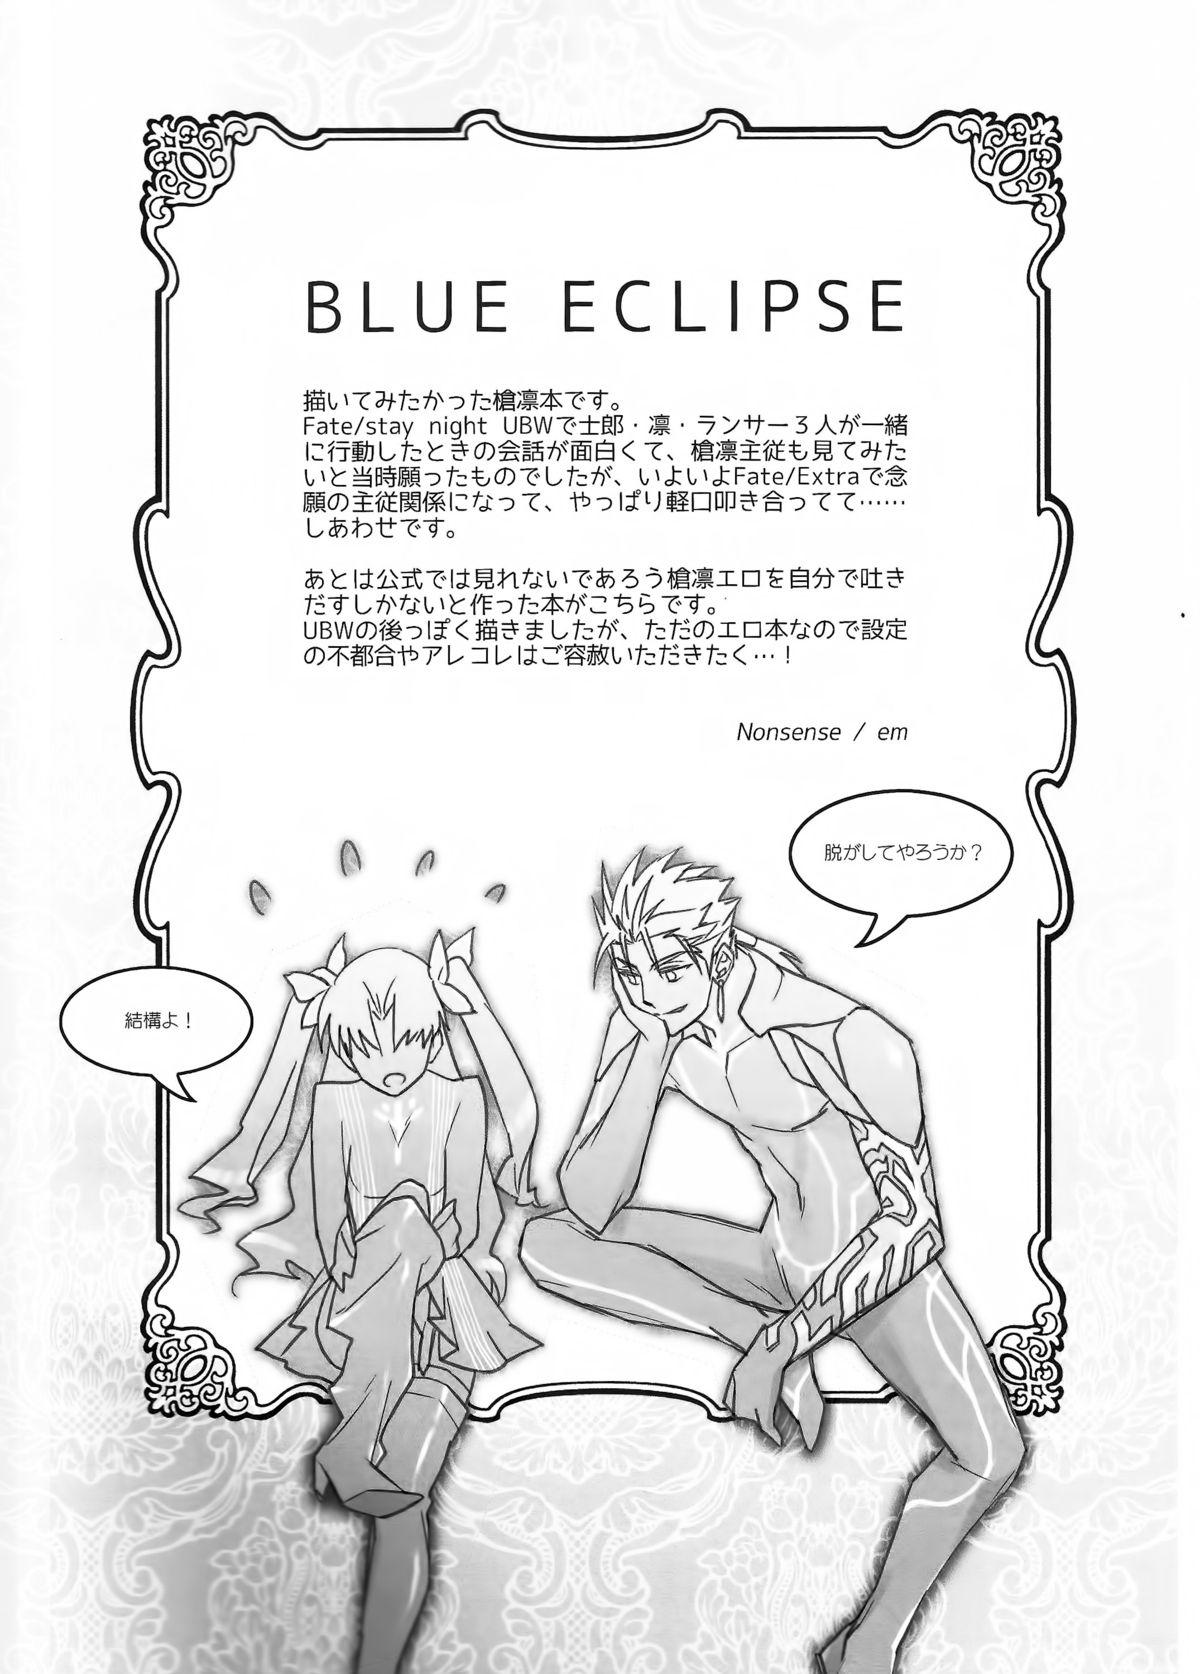 Couple Porn BLUE ECLIPSE - Fate stay night Stockings - Page 2